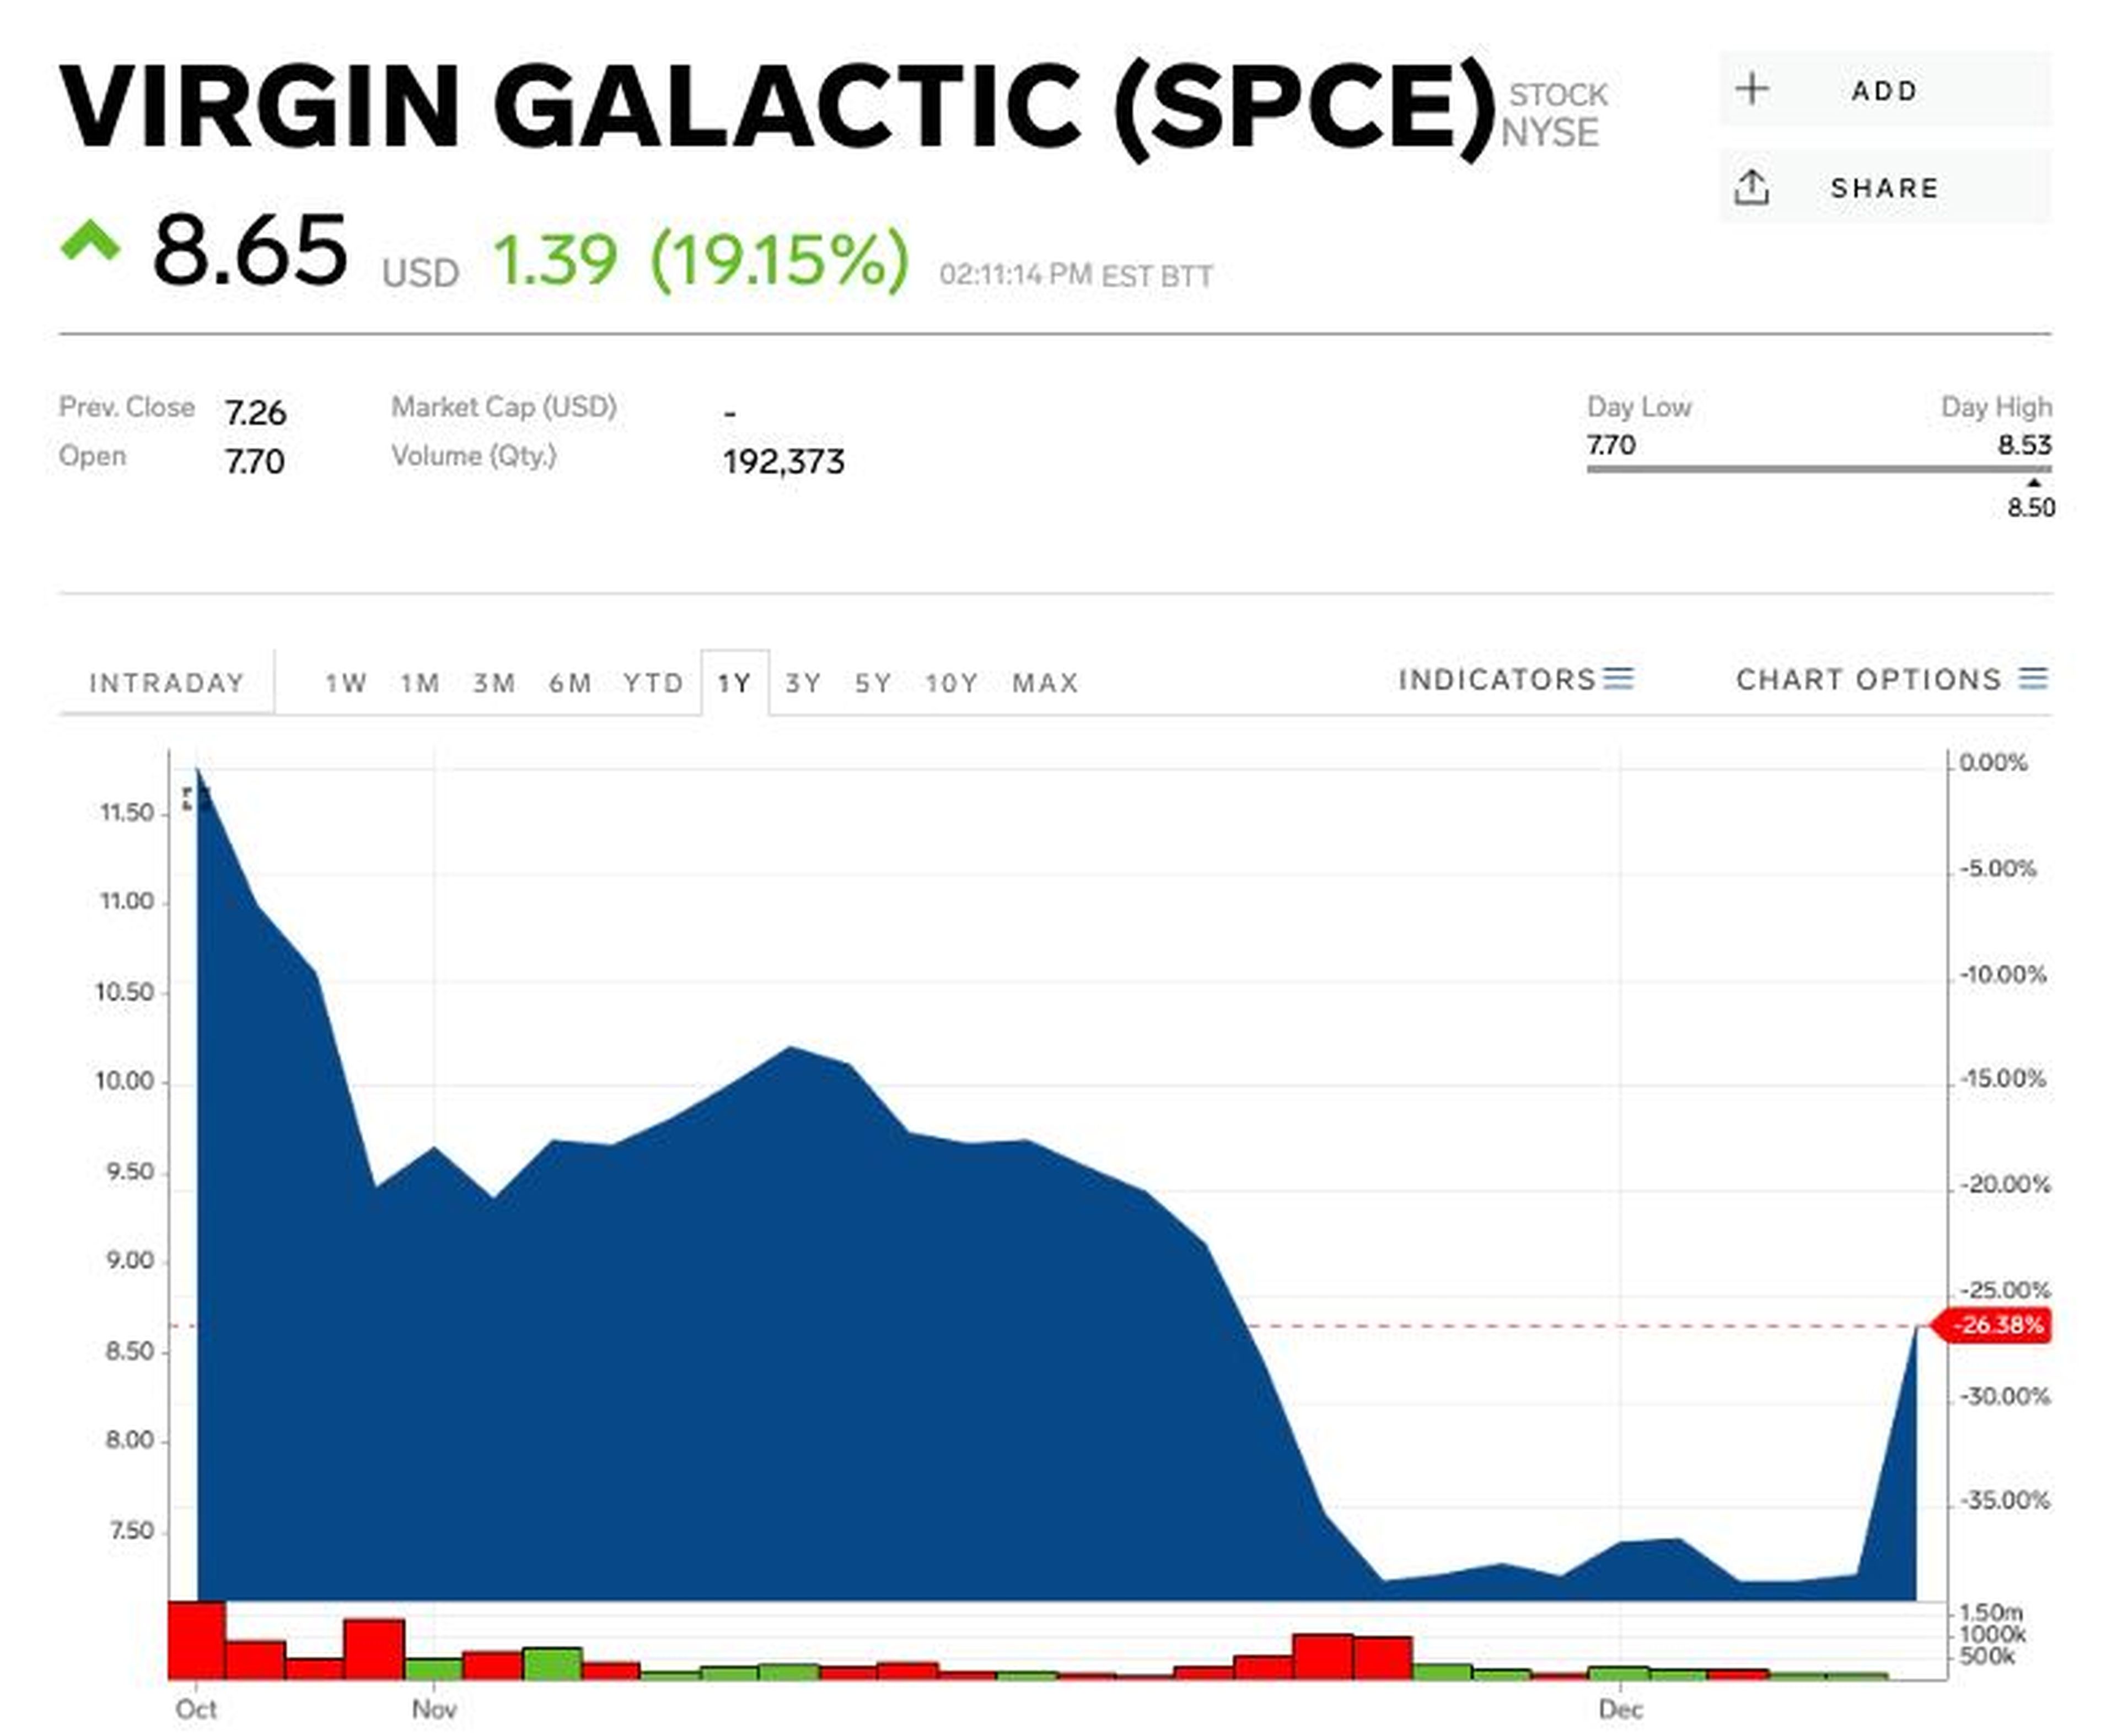 Virgin Galactic leaps after Morgan Stanley says the company's stock can jump 203% over the next year